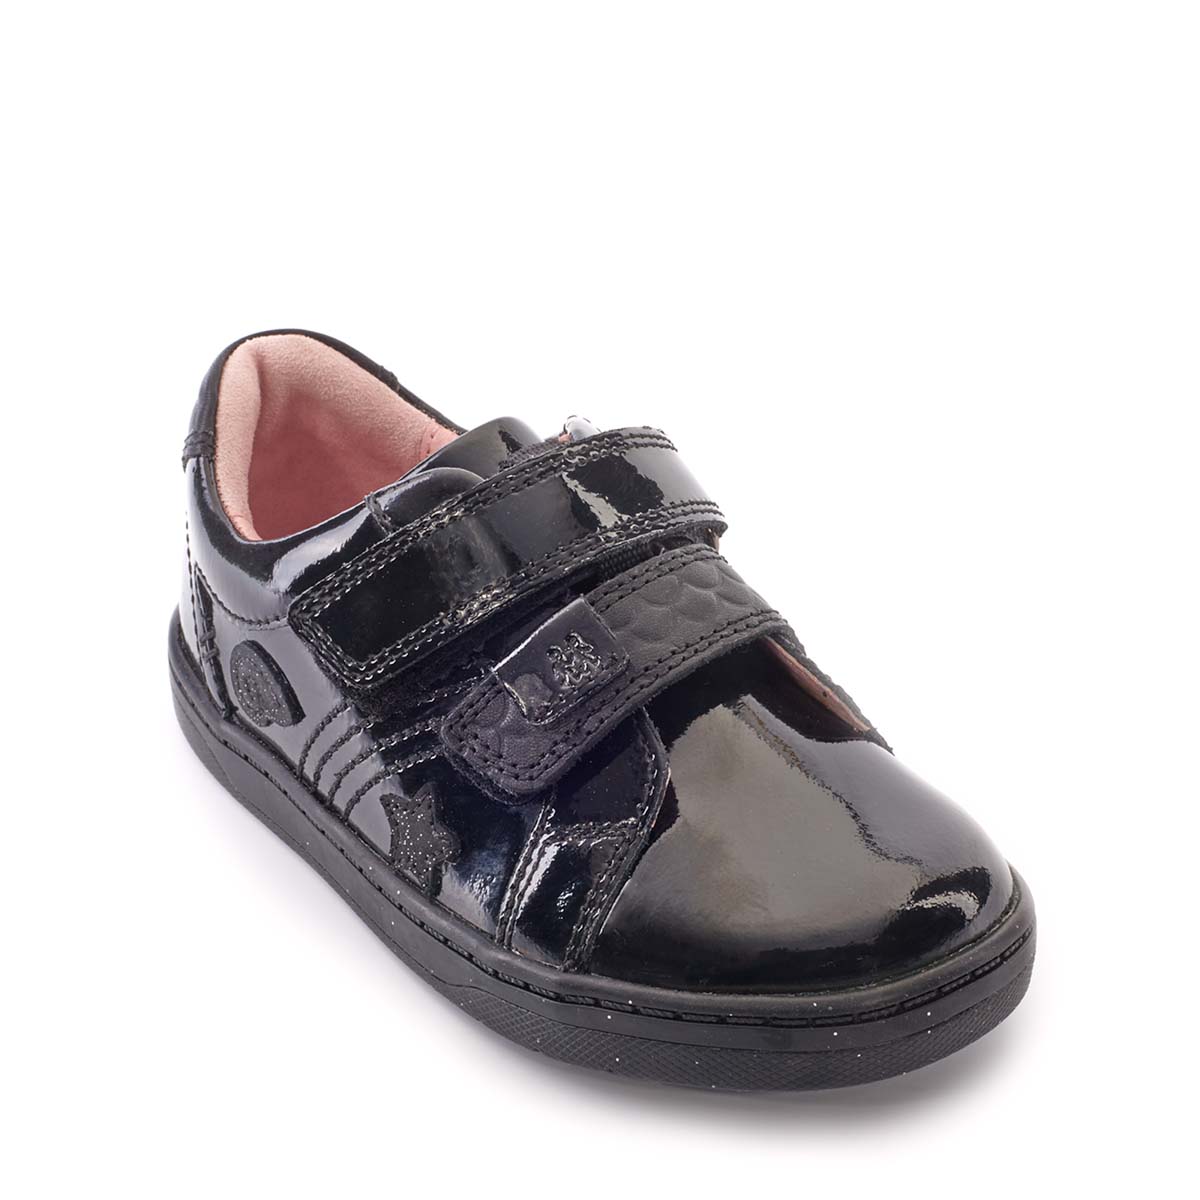 Start Rite Fantasy Black patent Kids girls school shoes 1741-36F in a Plain Leather in Size 9